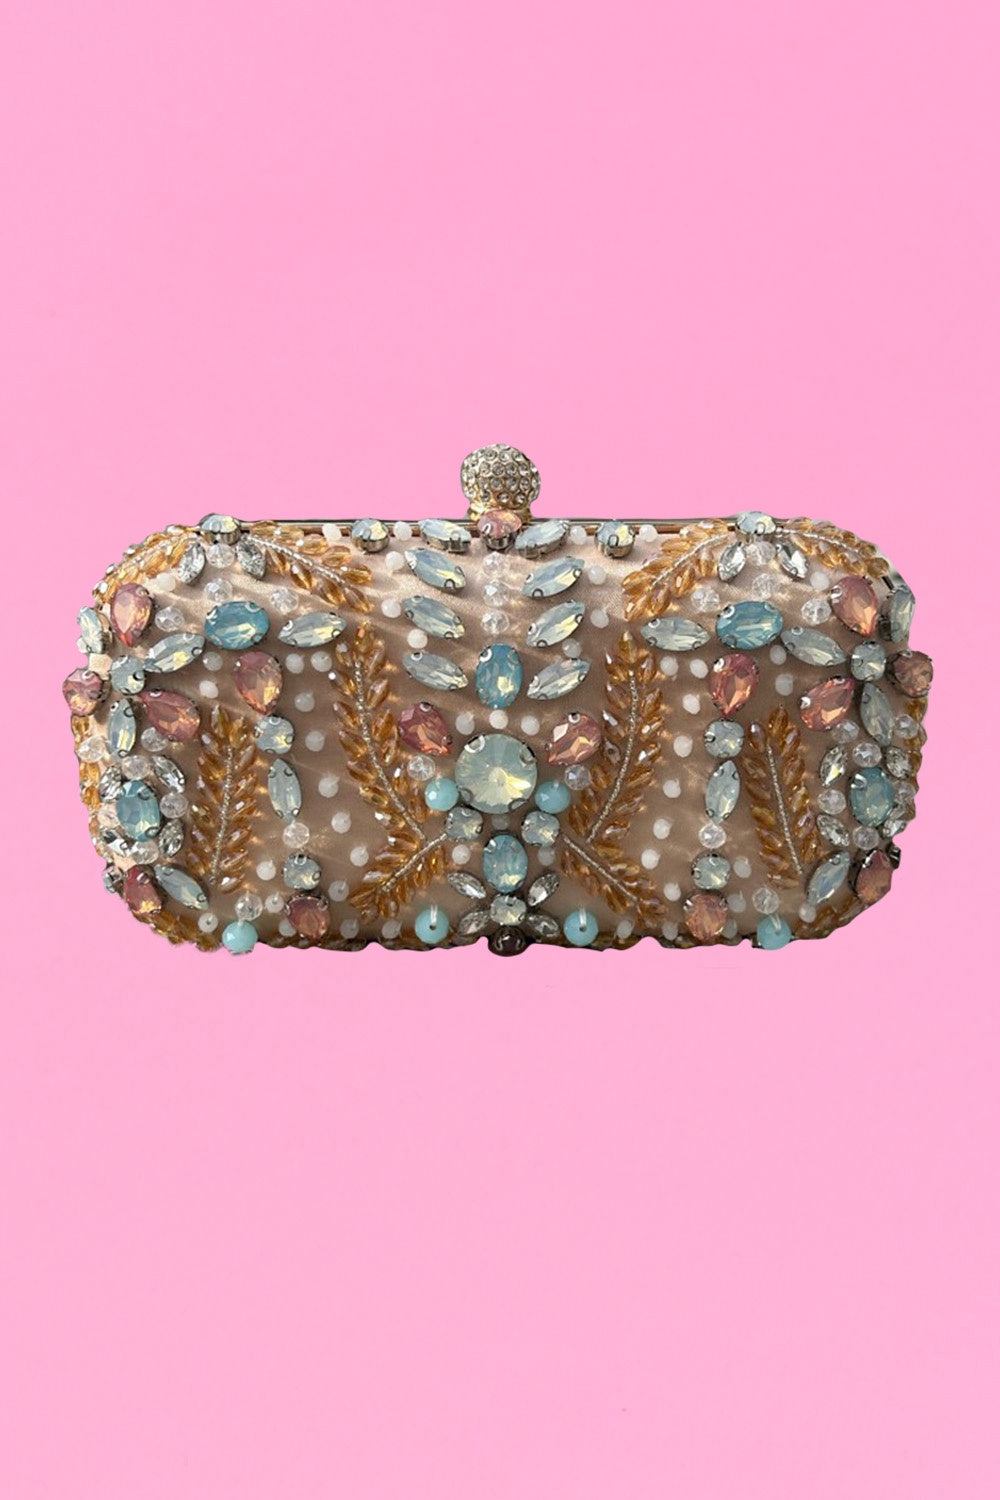 The Annah Stretton Champagne Lover Clutch without the chain strap